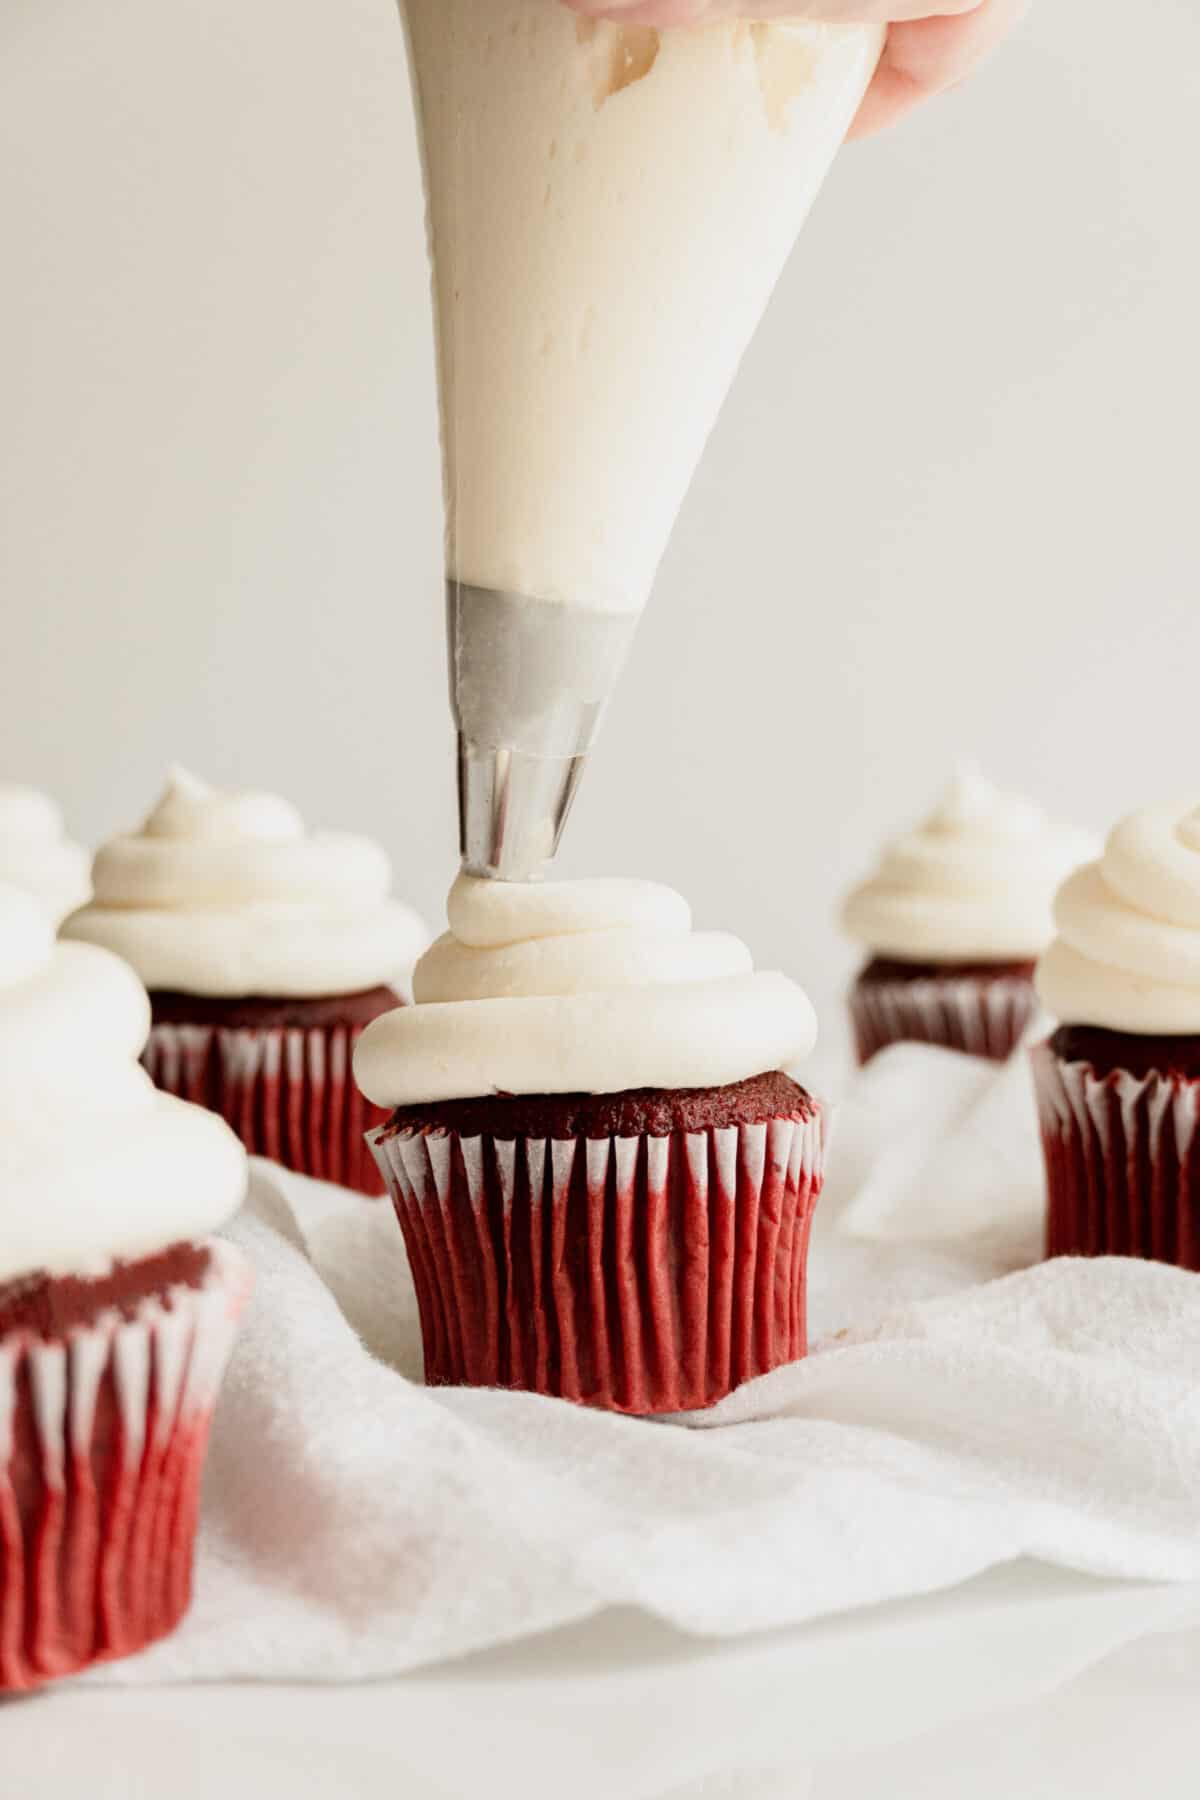 piping-red-velvet-cupcake-with-vanilla-buttercream-frosting.